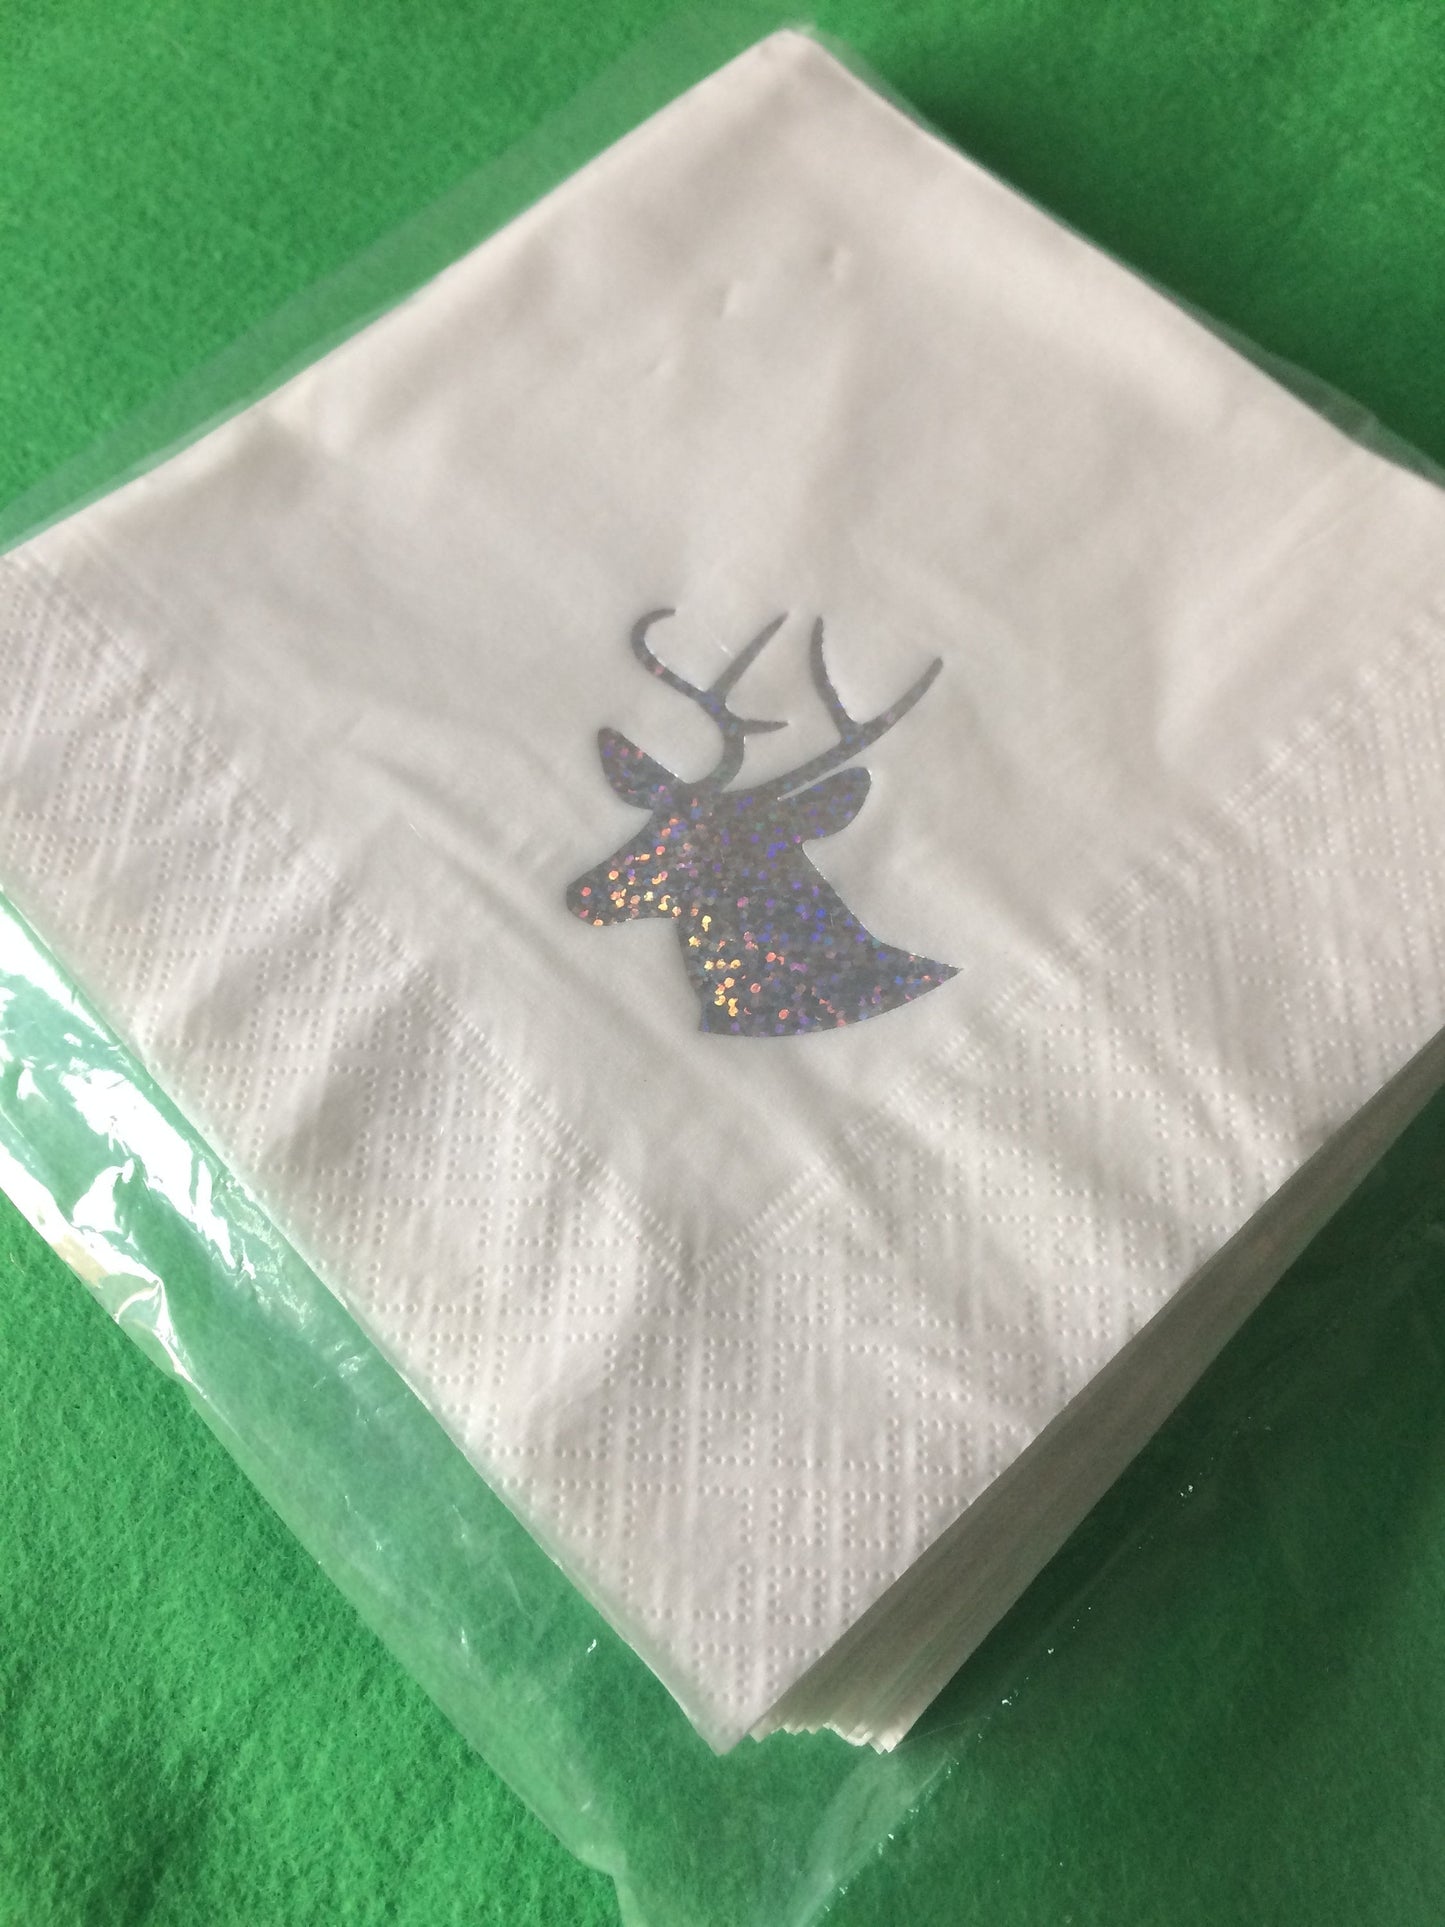 Christmas Napkins Serviettes White Quality 3ply 40cm With Stags Head Design in Sparkling Silver